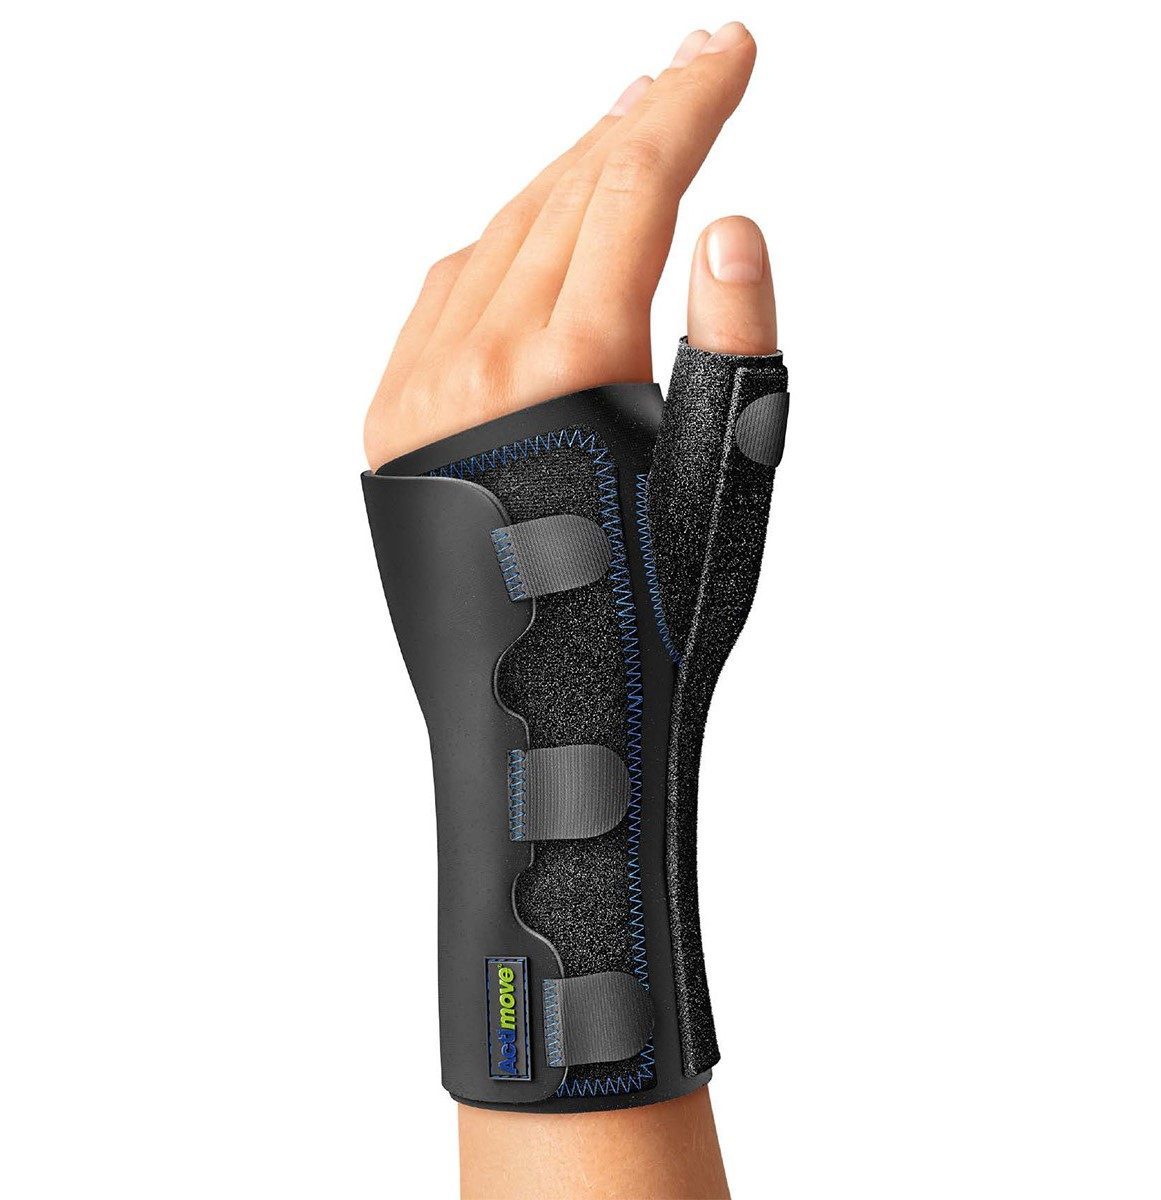 Actimove Gauntlet - Professional Line - wrist and thumb stabiliser